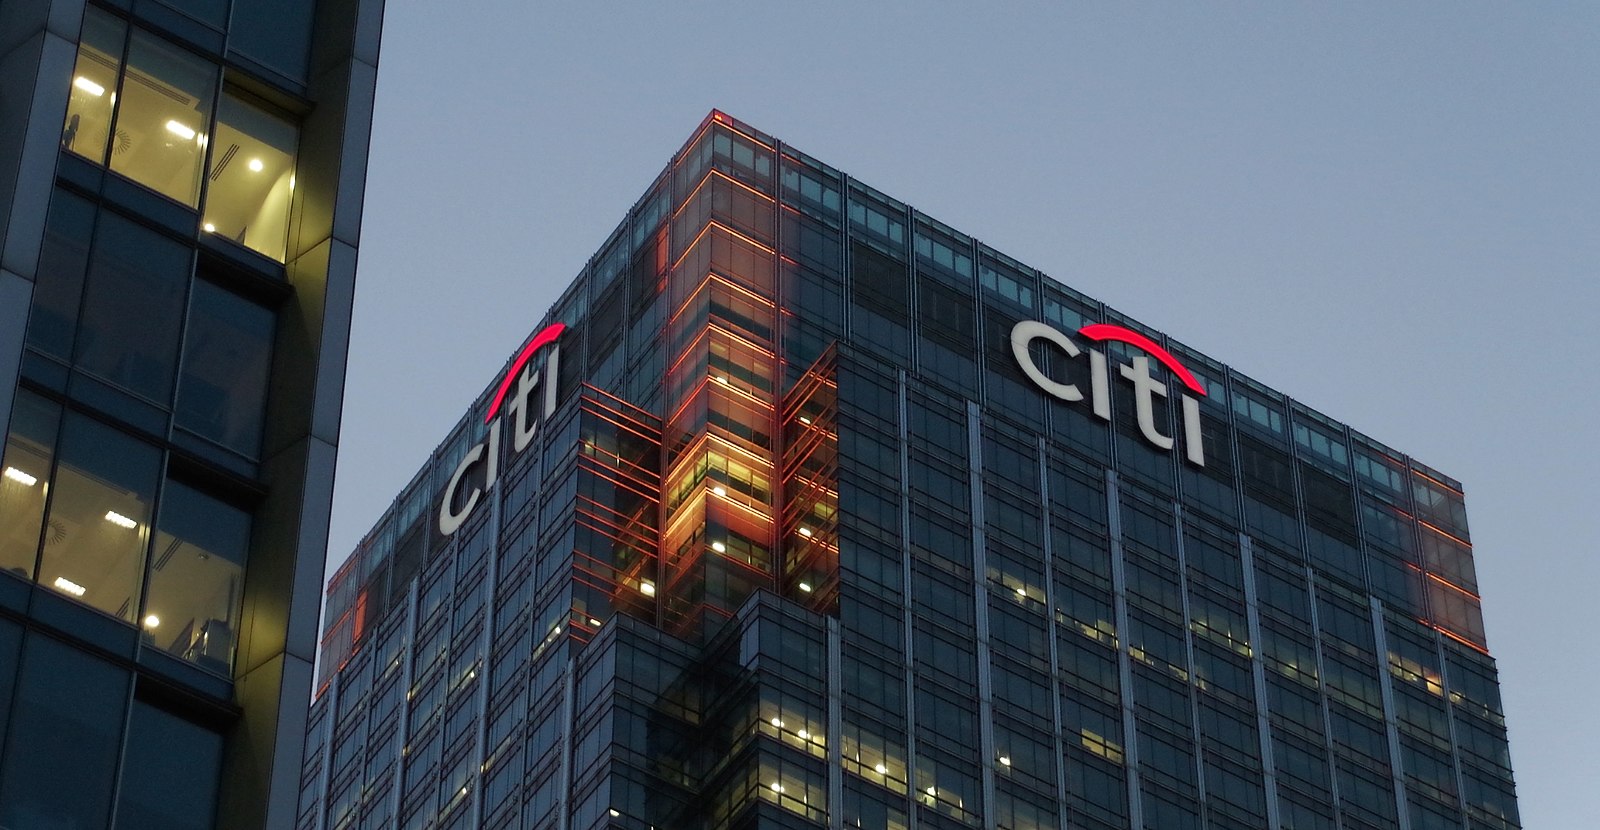 CFACT challenges Citigroup’s “sustainable financing” during shareholder meeting